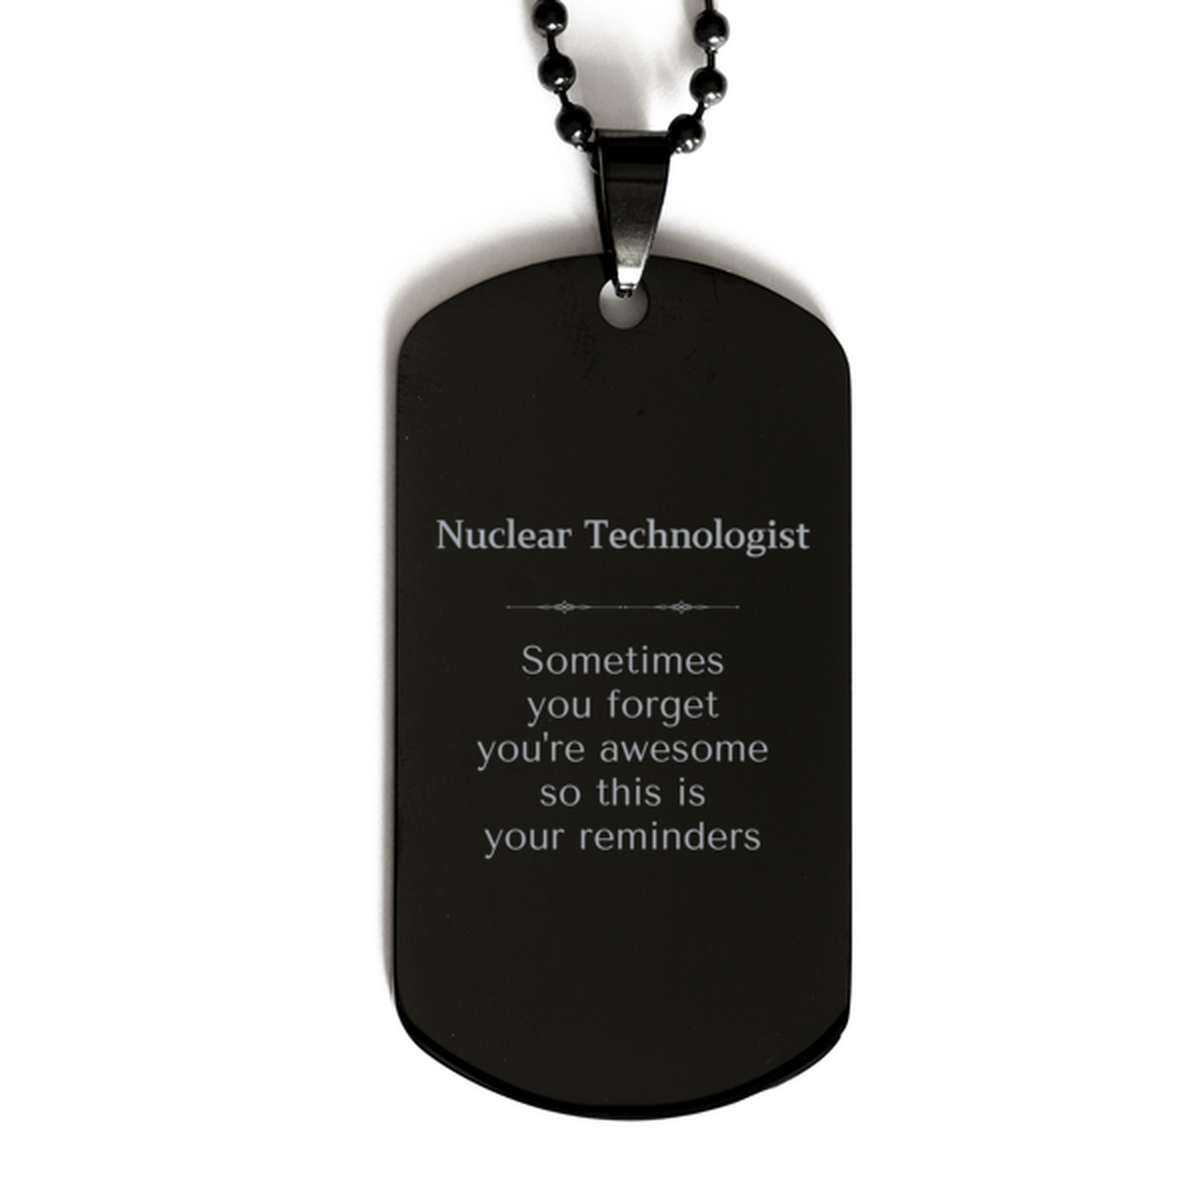 Sentimental Nuclear Technologist Black Dog Tag, Nuclear Technologist Sometimes you forget you're awesome so this is your reminders, Graduation Christmas Birthday Gifts for Nuclear Technologist, Men, Women, Coworkers